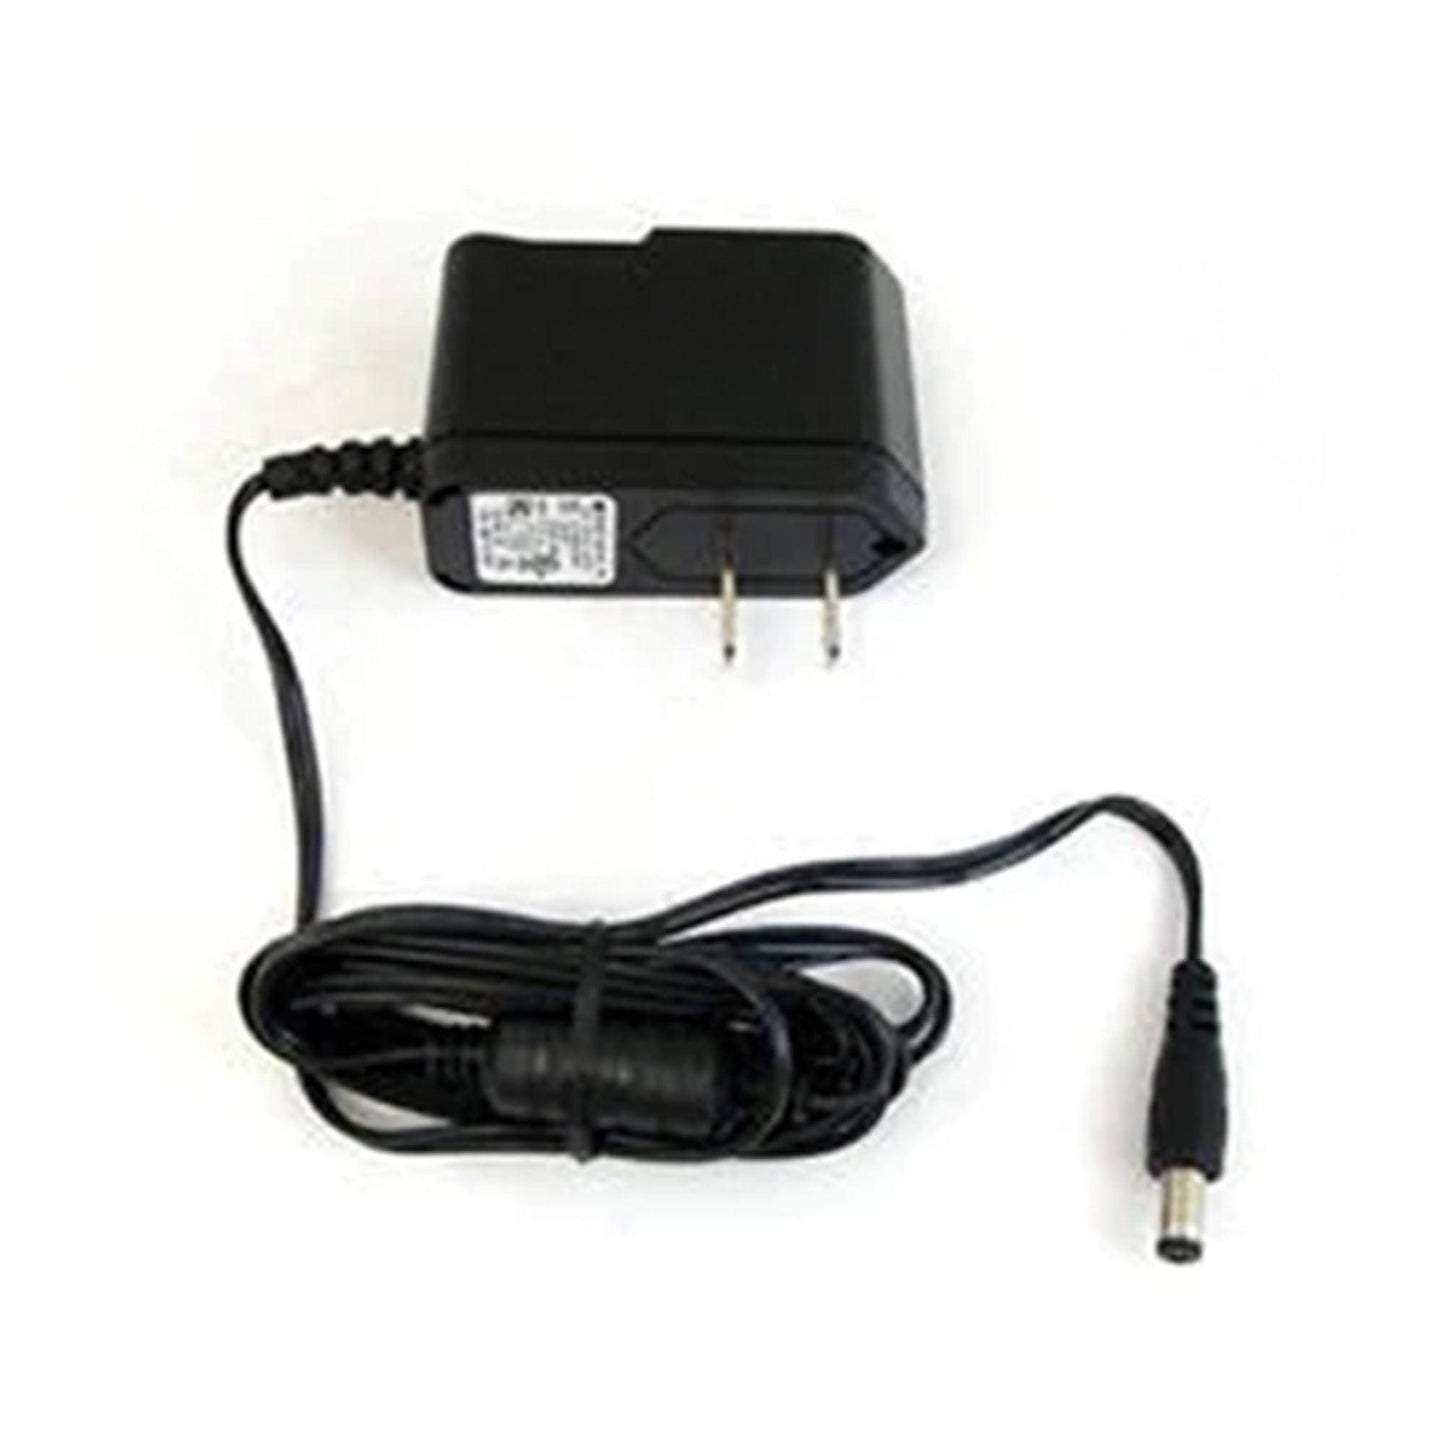 Yealink Power Adapter - For models T26P, T27, T41, T43, T53 - SpectrumVoIP